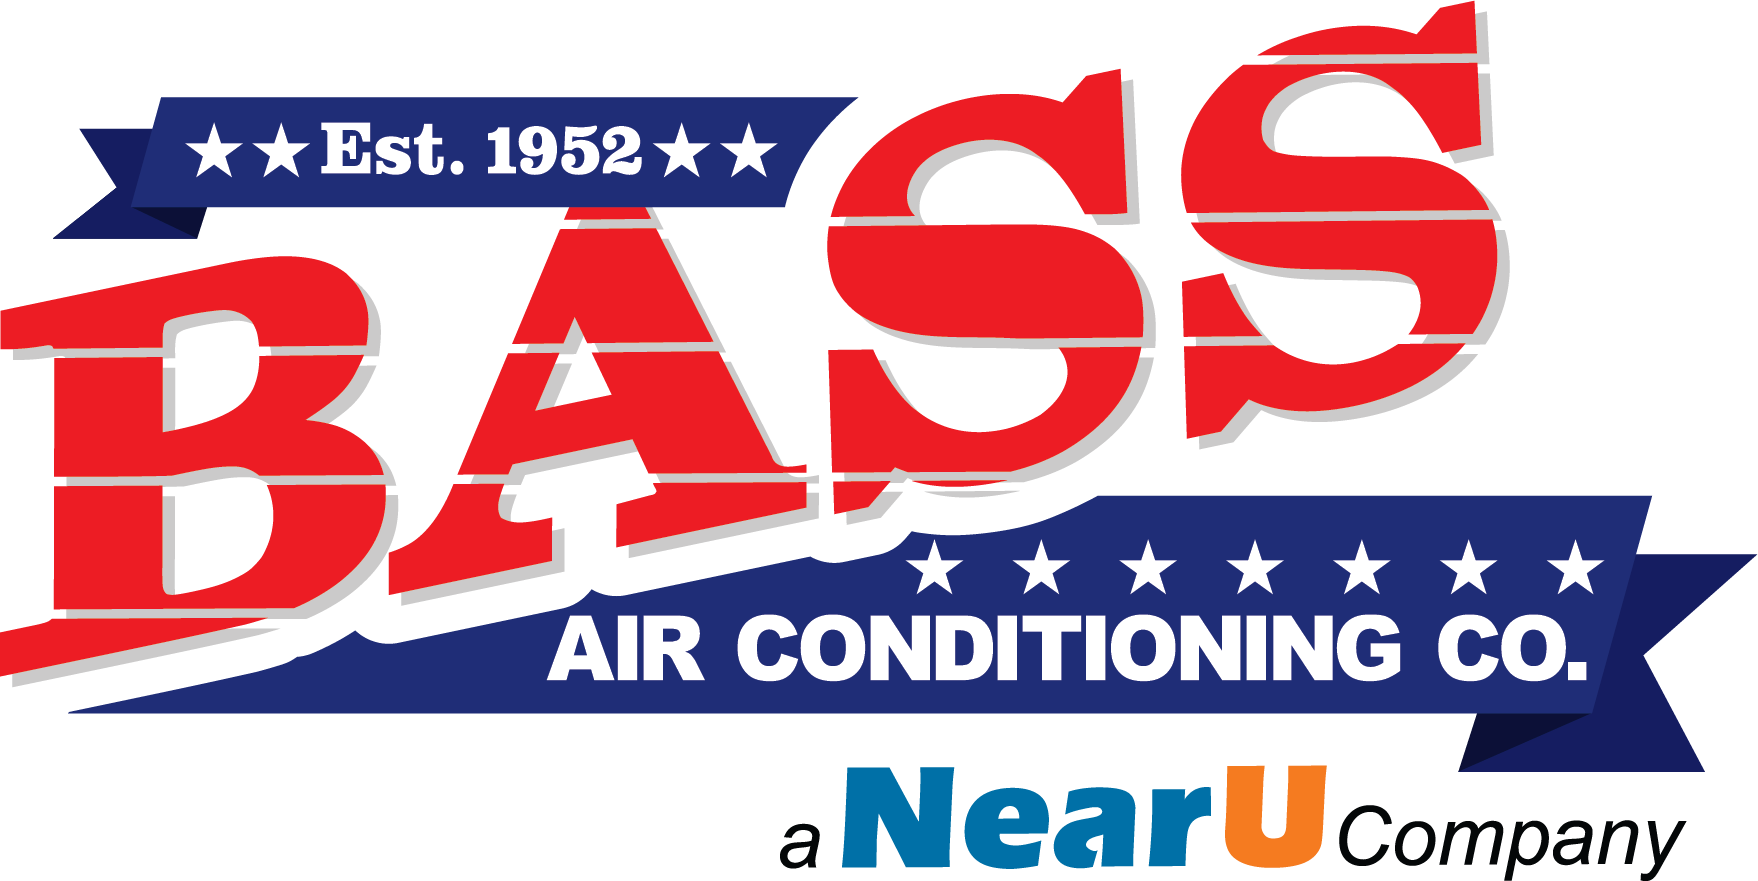 Bass Air Conditioning Company